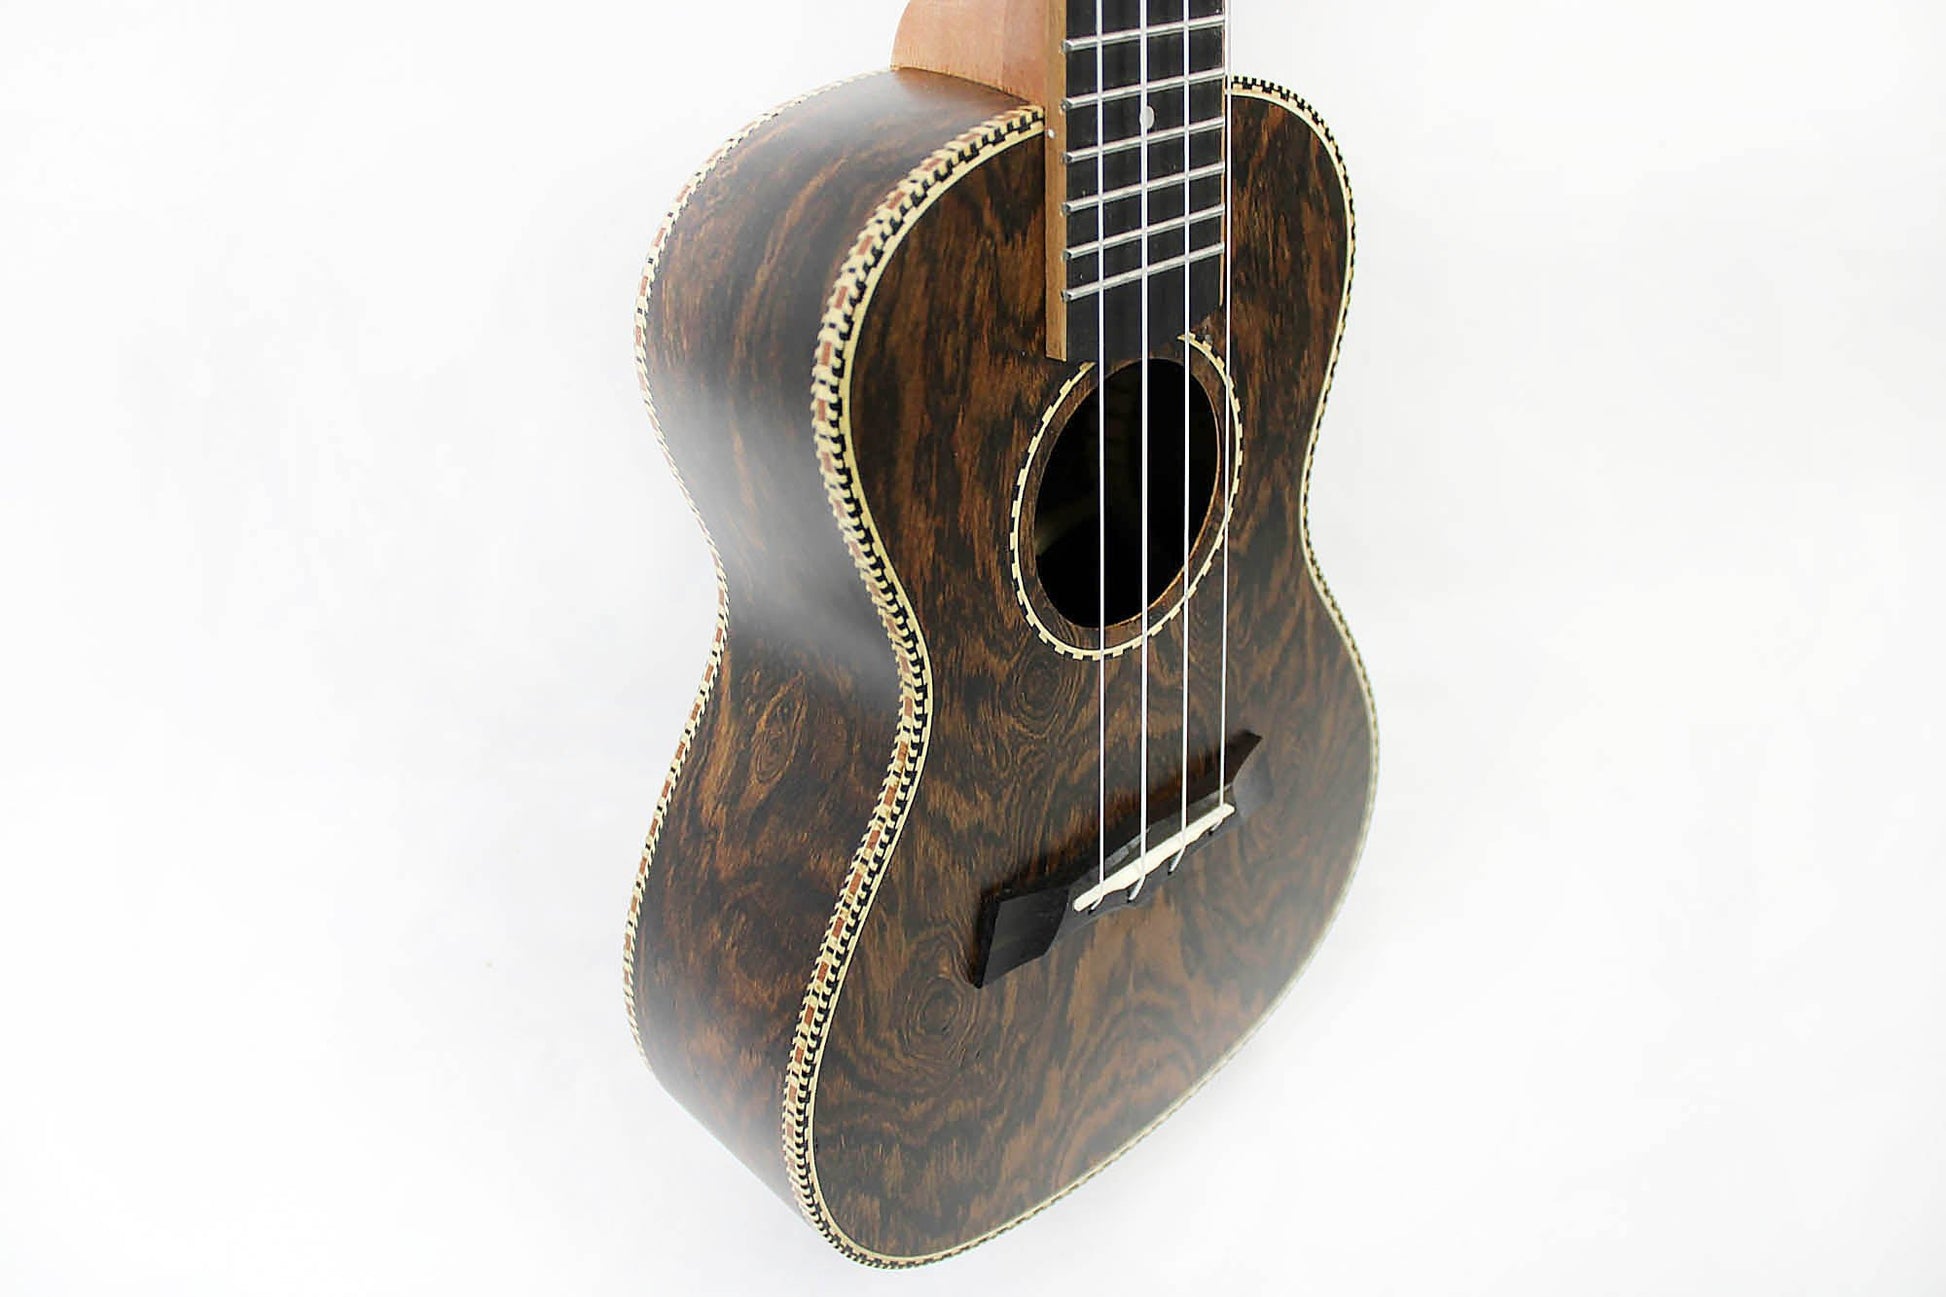 This is the front side view of the top and neck of a Snail SNAILBOCUKC Bocote Concert Ukulele.